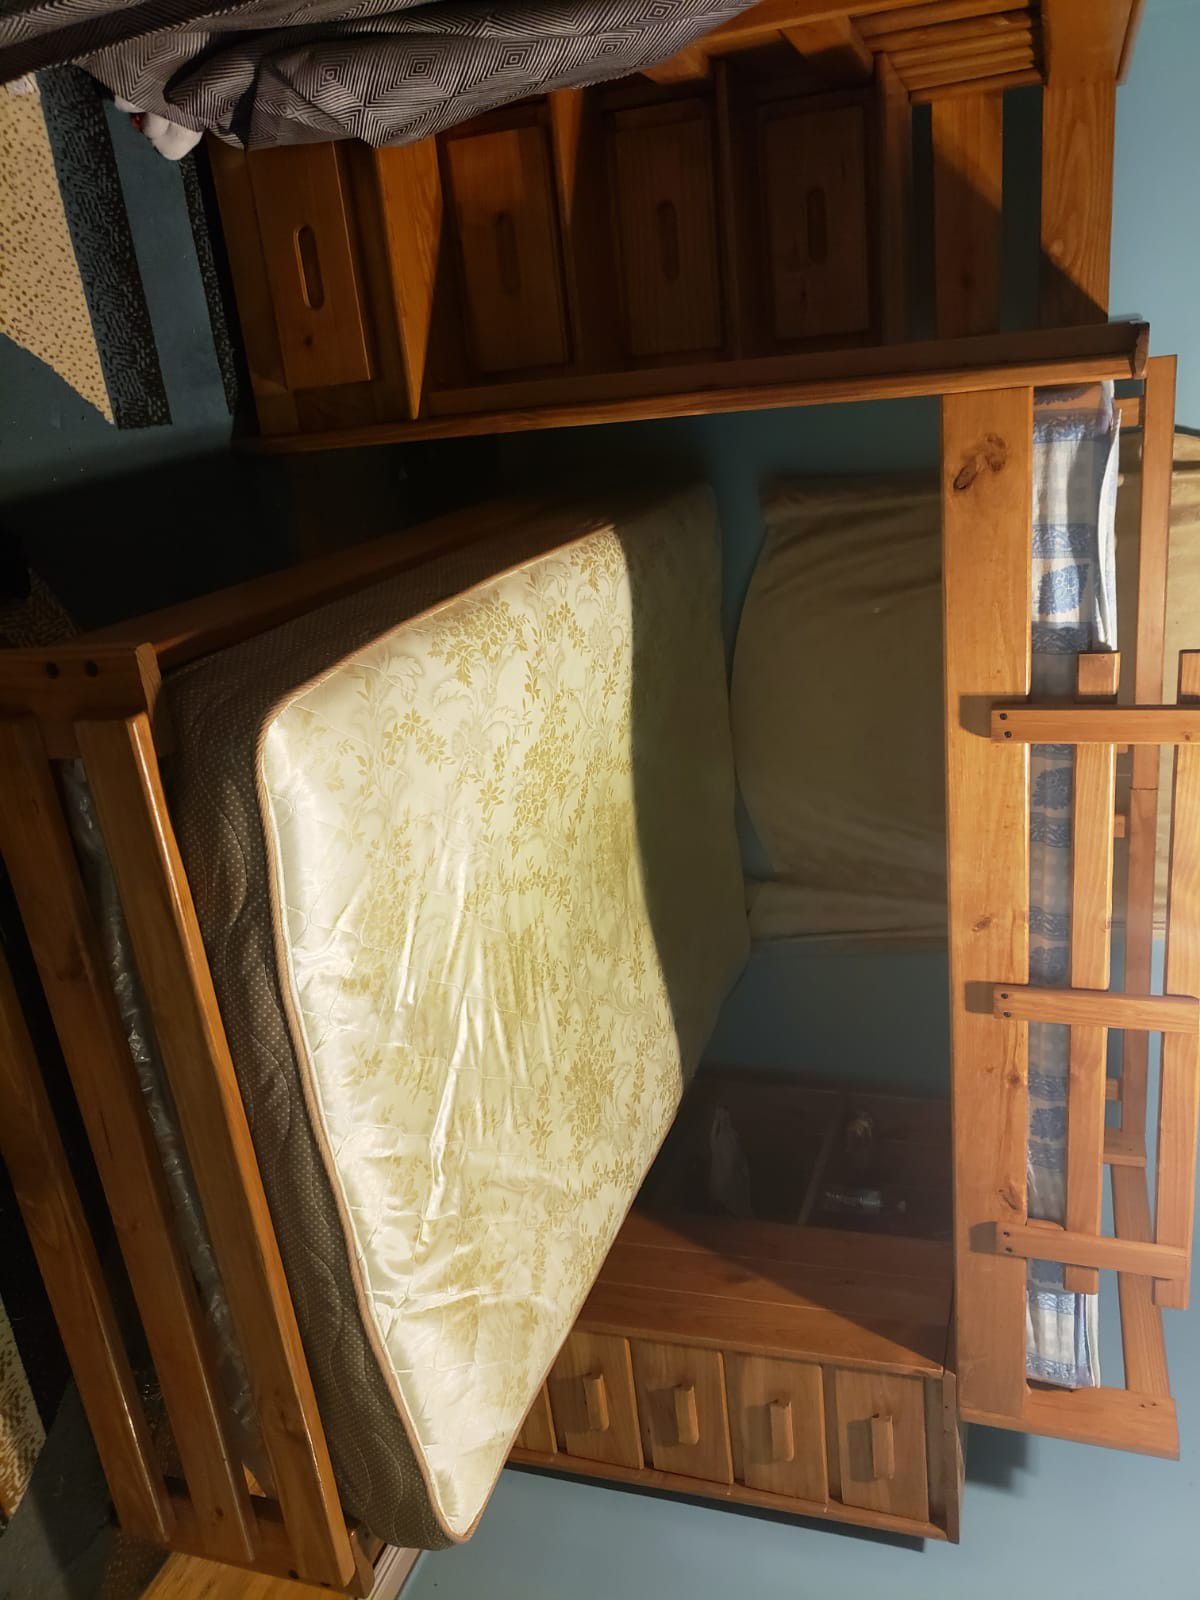 Full sized bunk bed